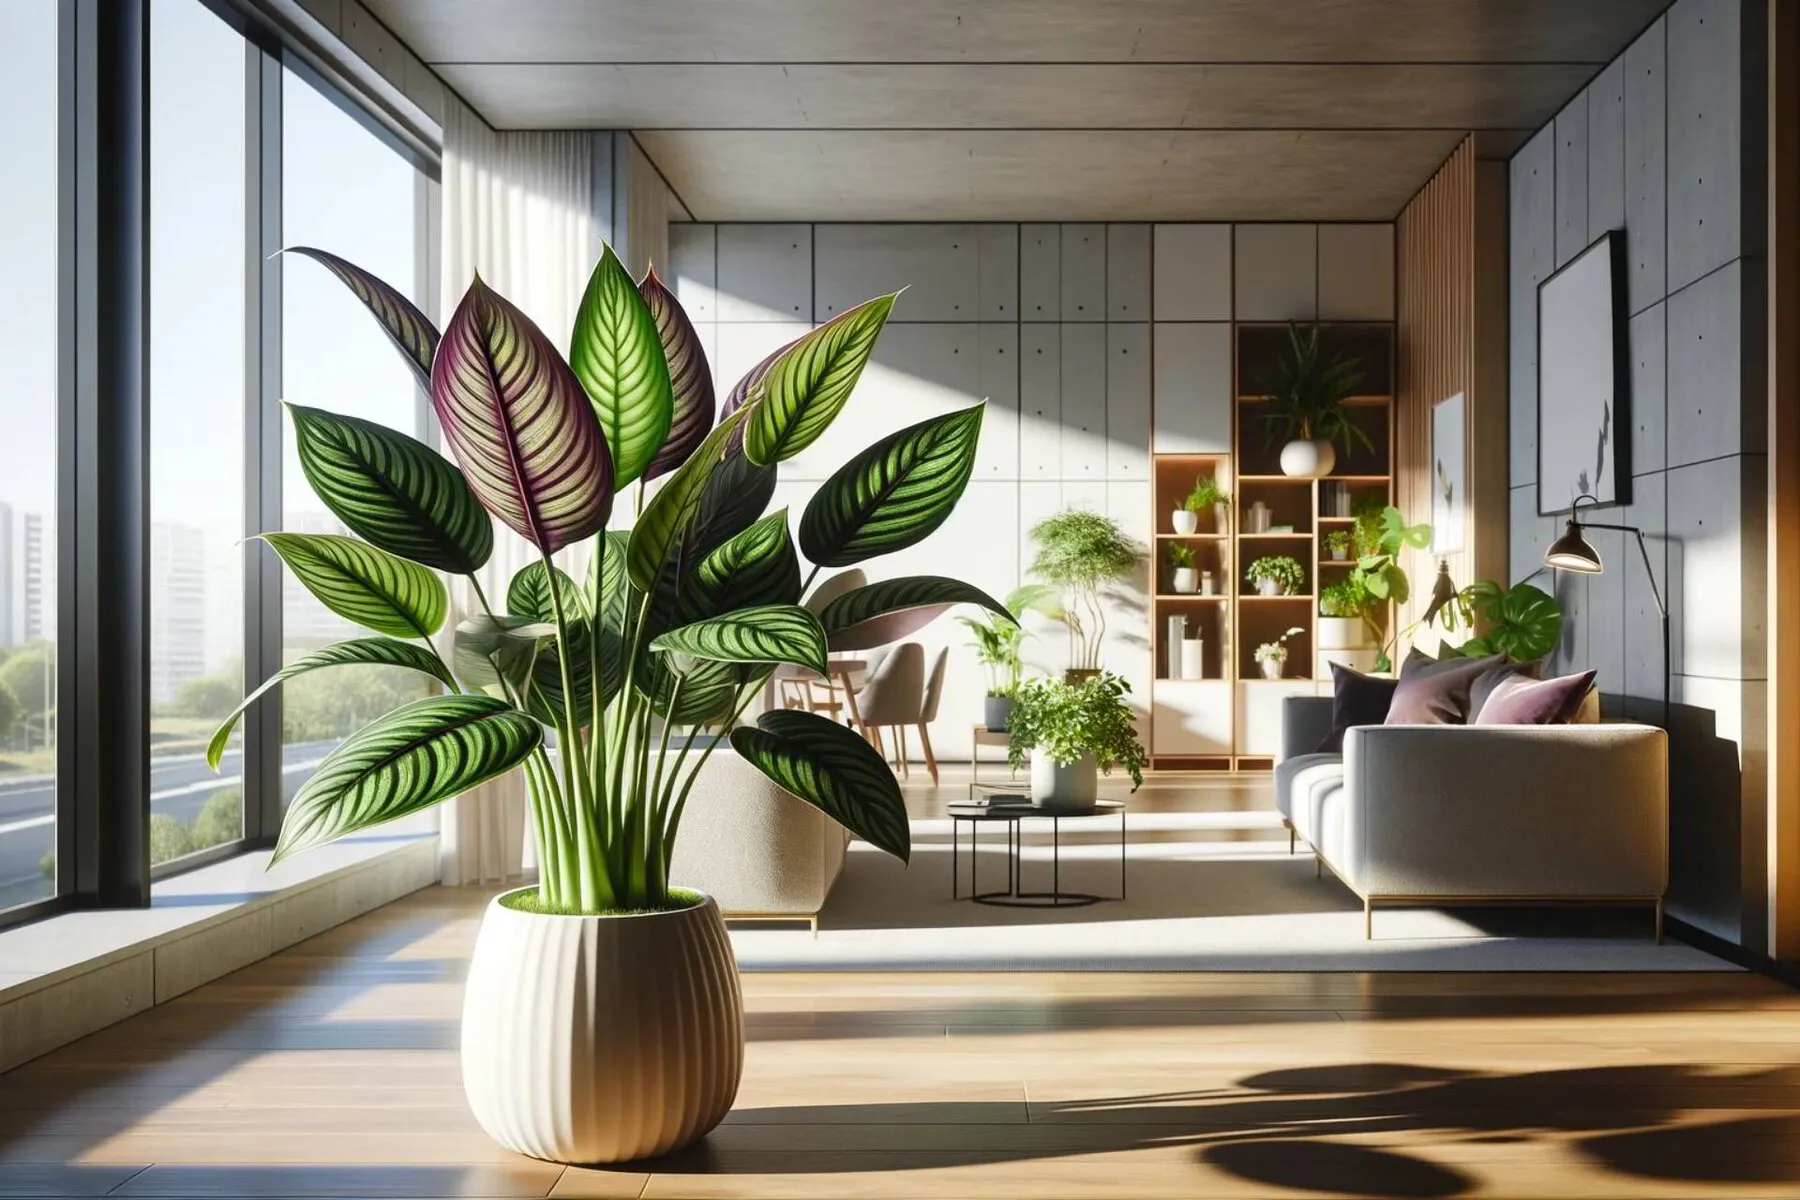 Calathea plant indoors in a modern, brightly lit home